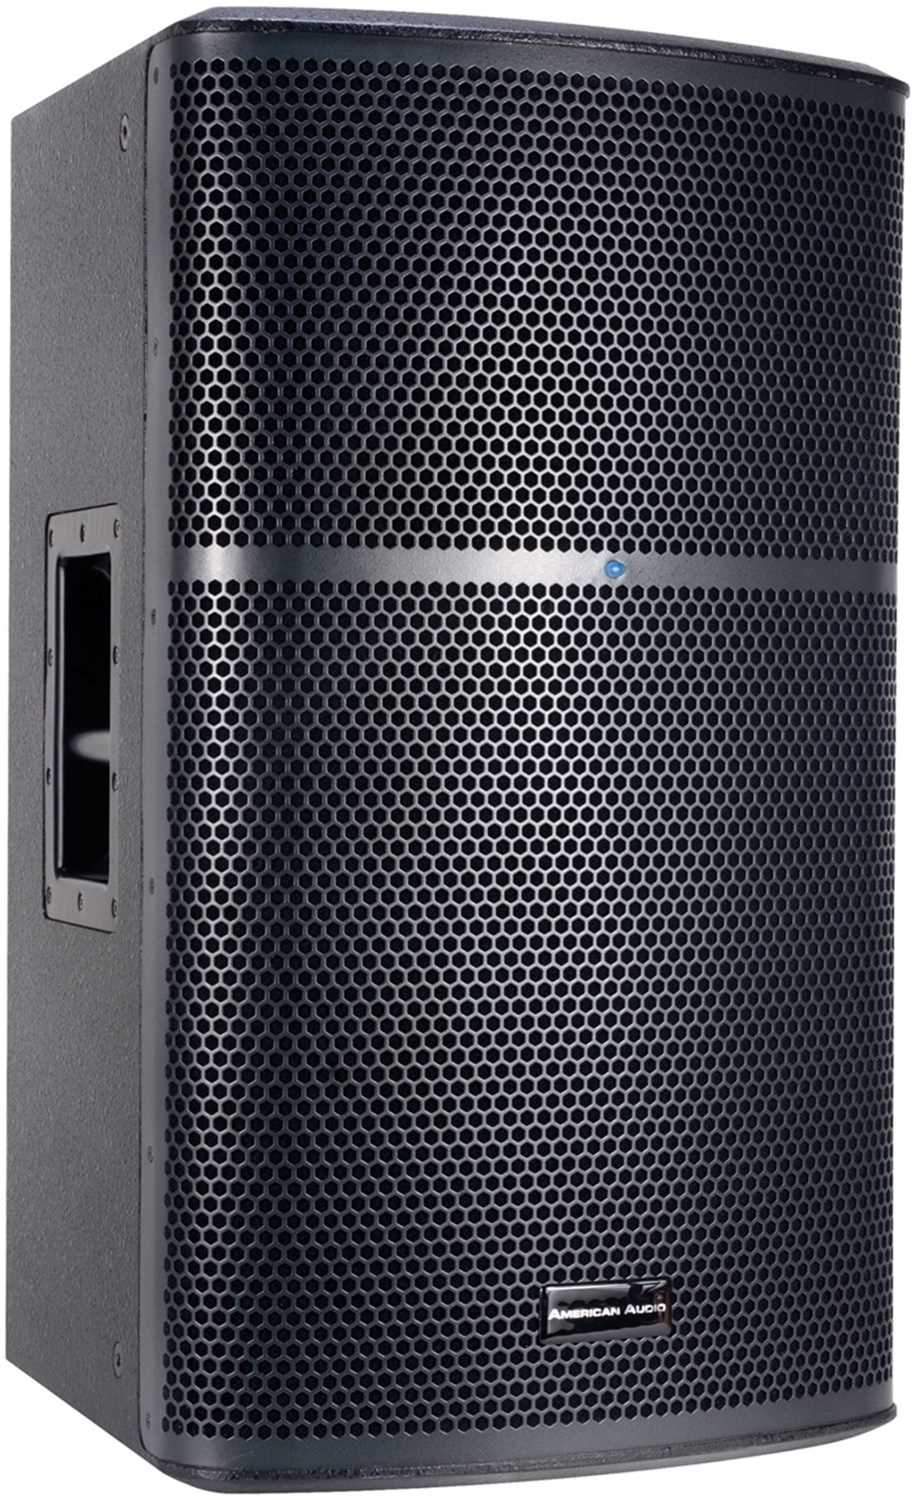 American Audio DLT15A 15-Inch Powered Speaker - ProSound and Stage Lighting